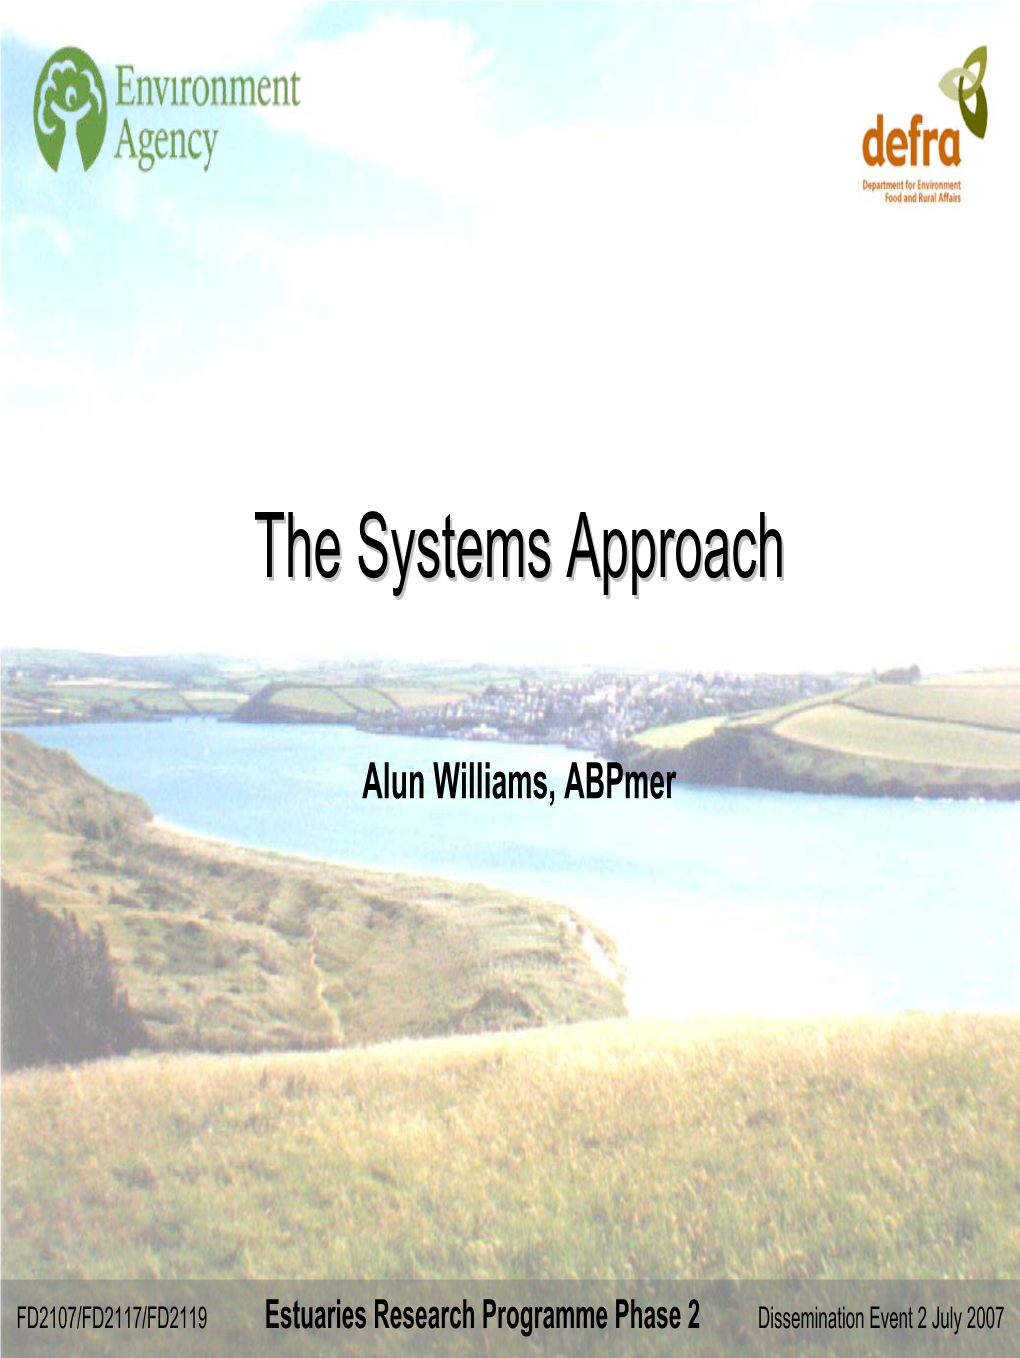 The Systems Approach and Behavioural Models